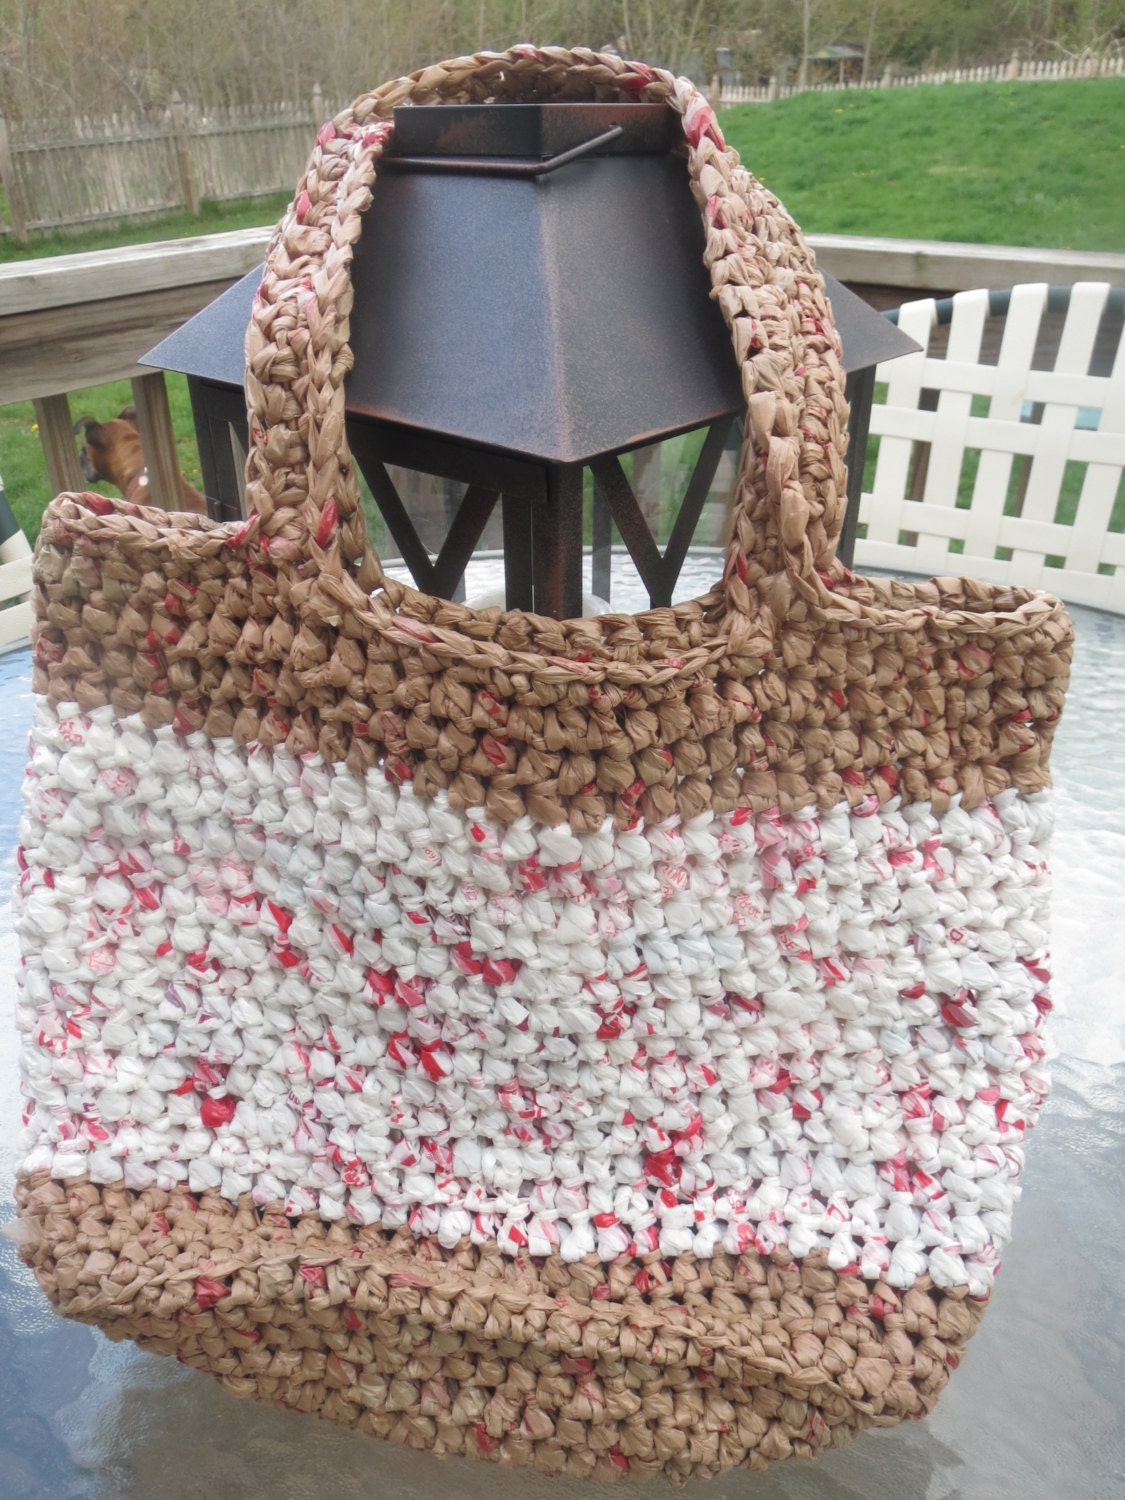 Upcycled / Recycled Crochet Plastic bag Tote Reusable Plarn